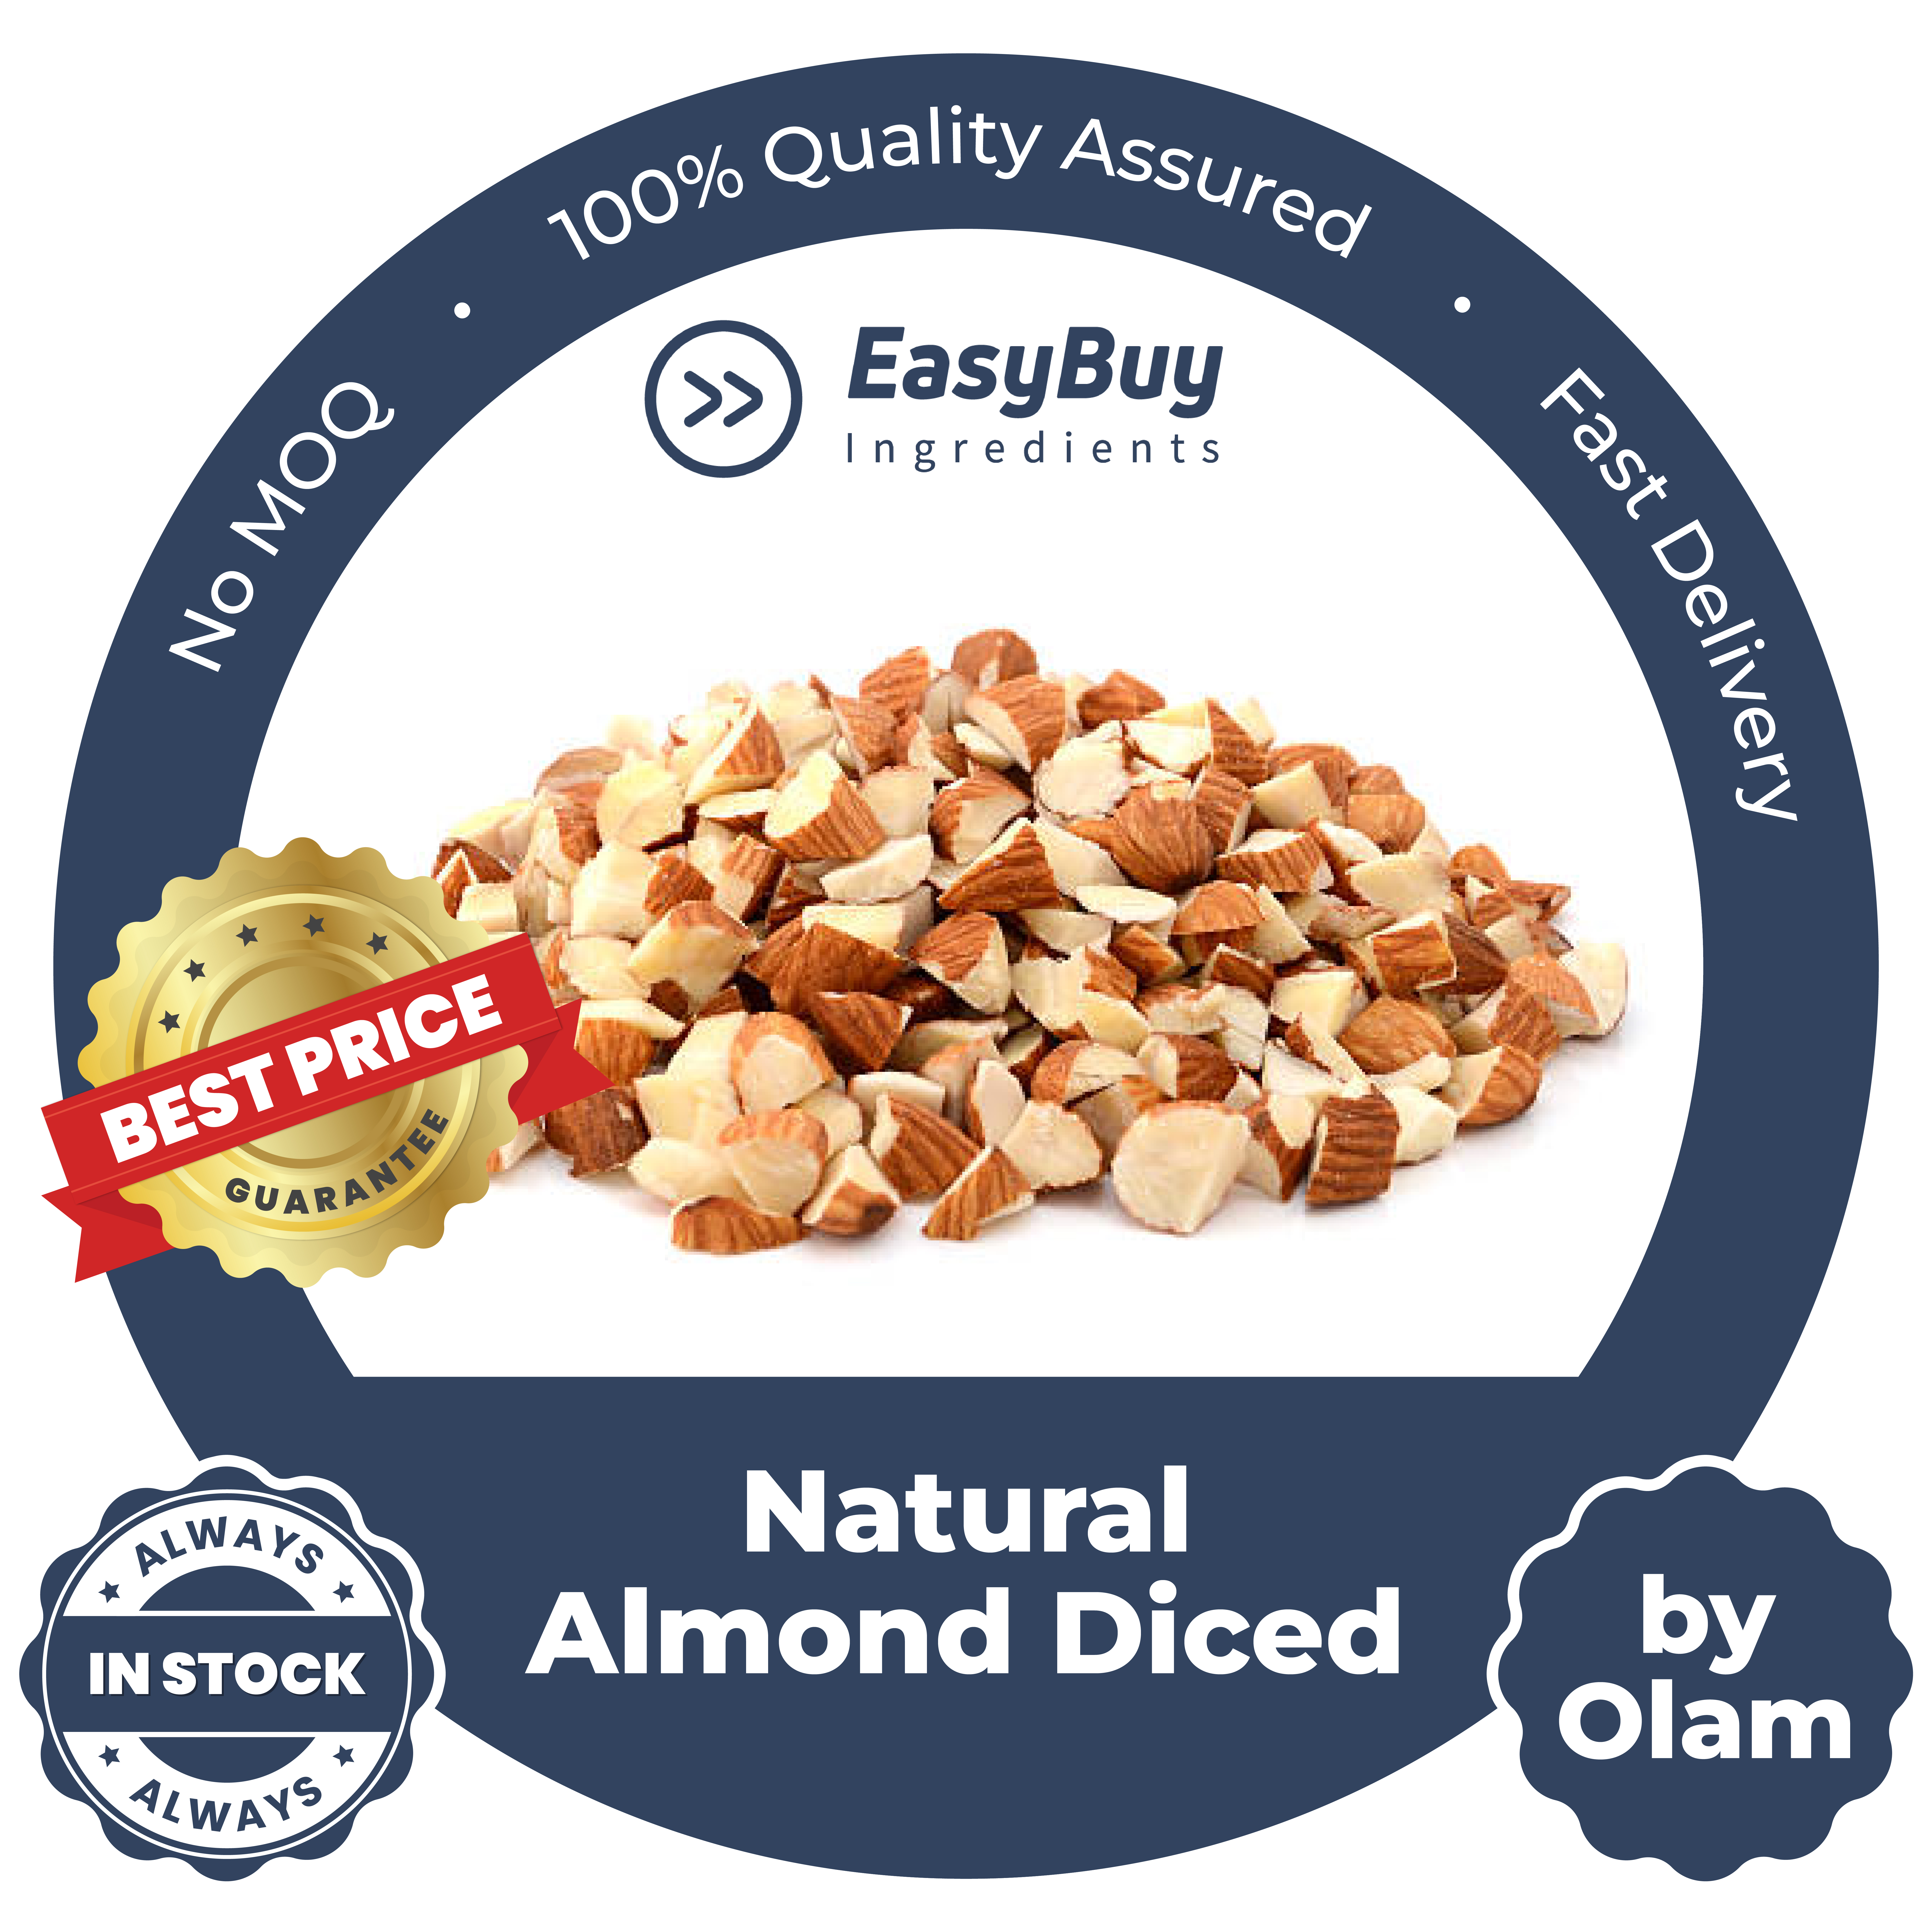 Natural Almond Diced by Olam